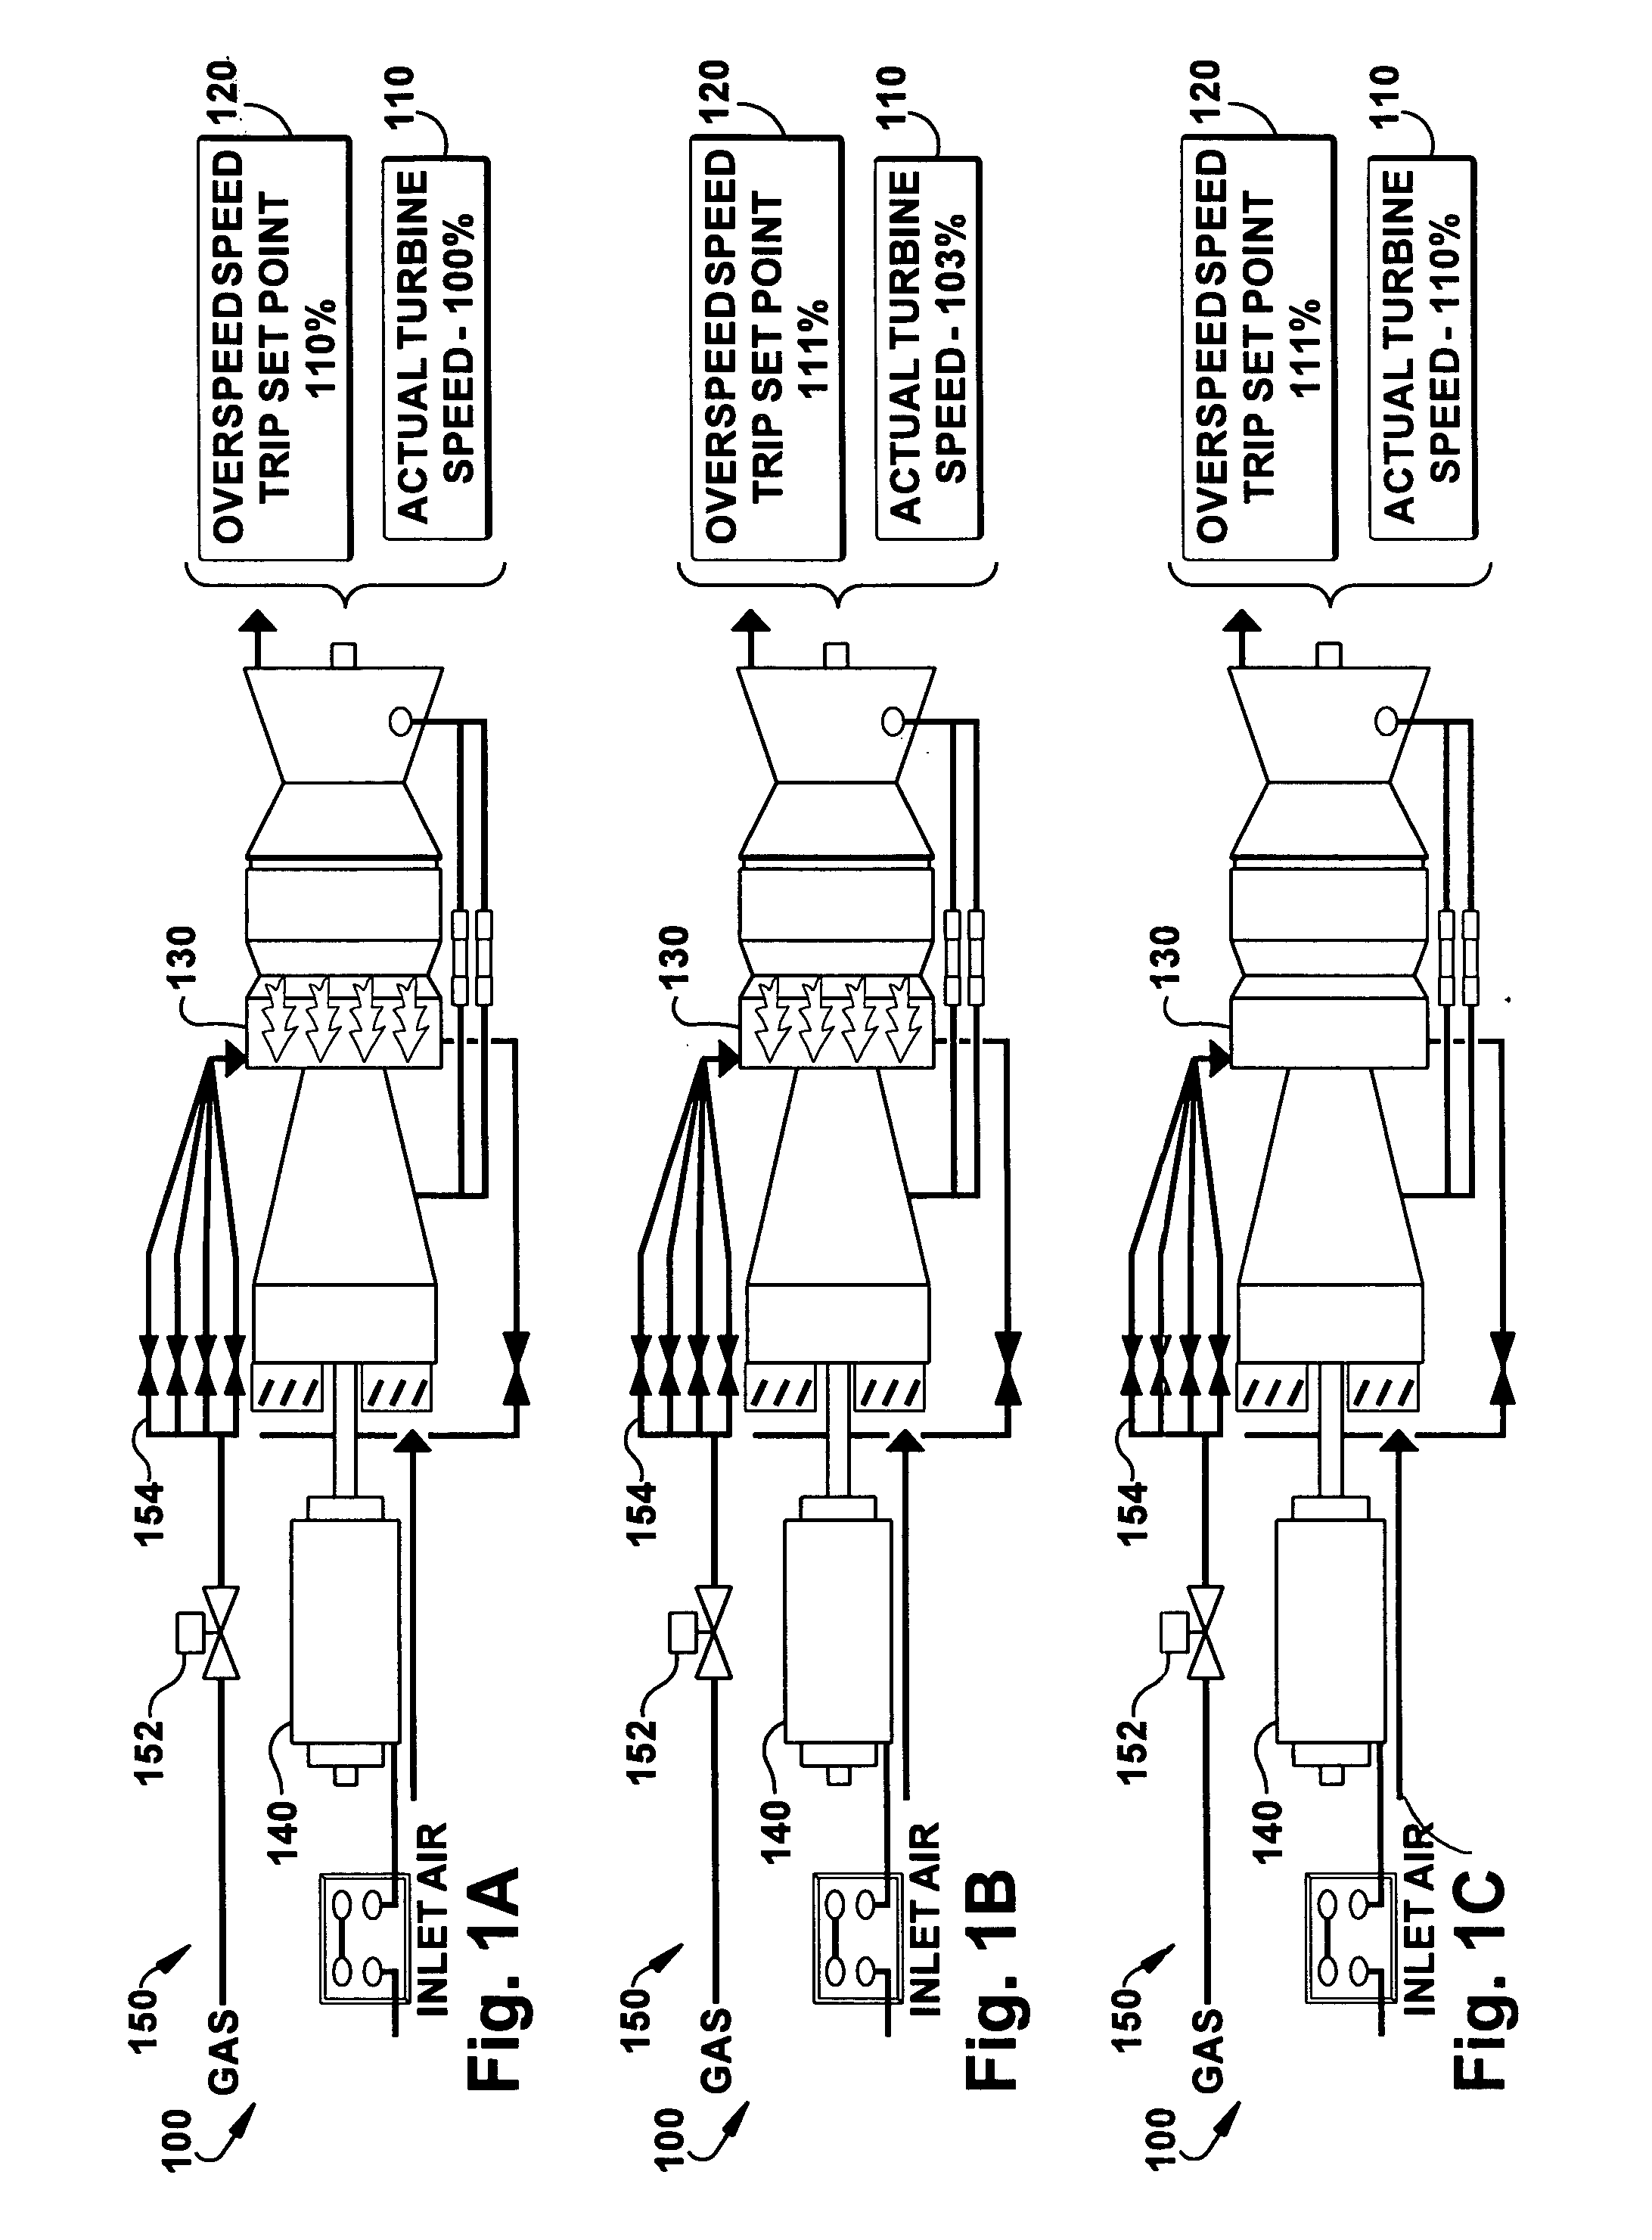 Method and system for testing the overspeed protection system of a turbomachine